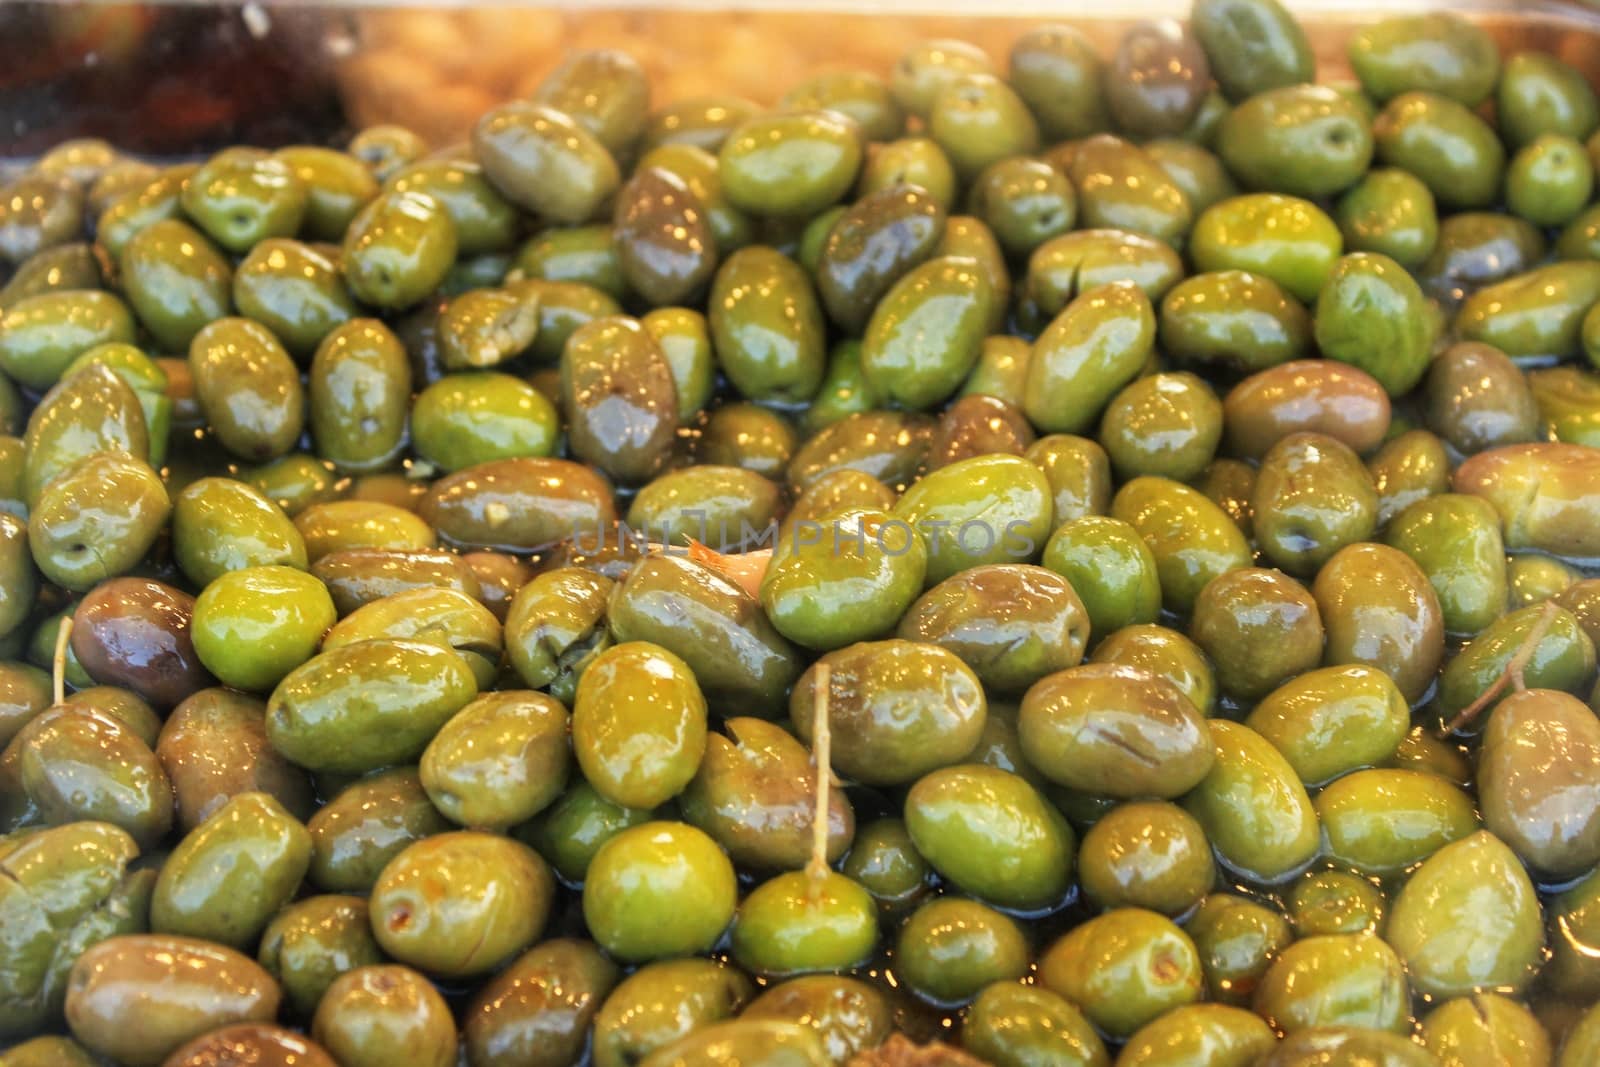 Olives texture at a market stall in Spain